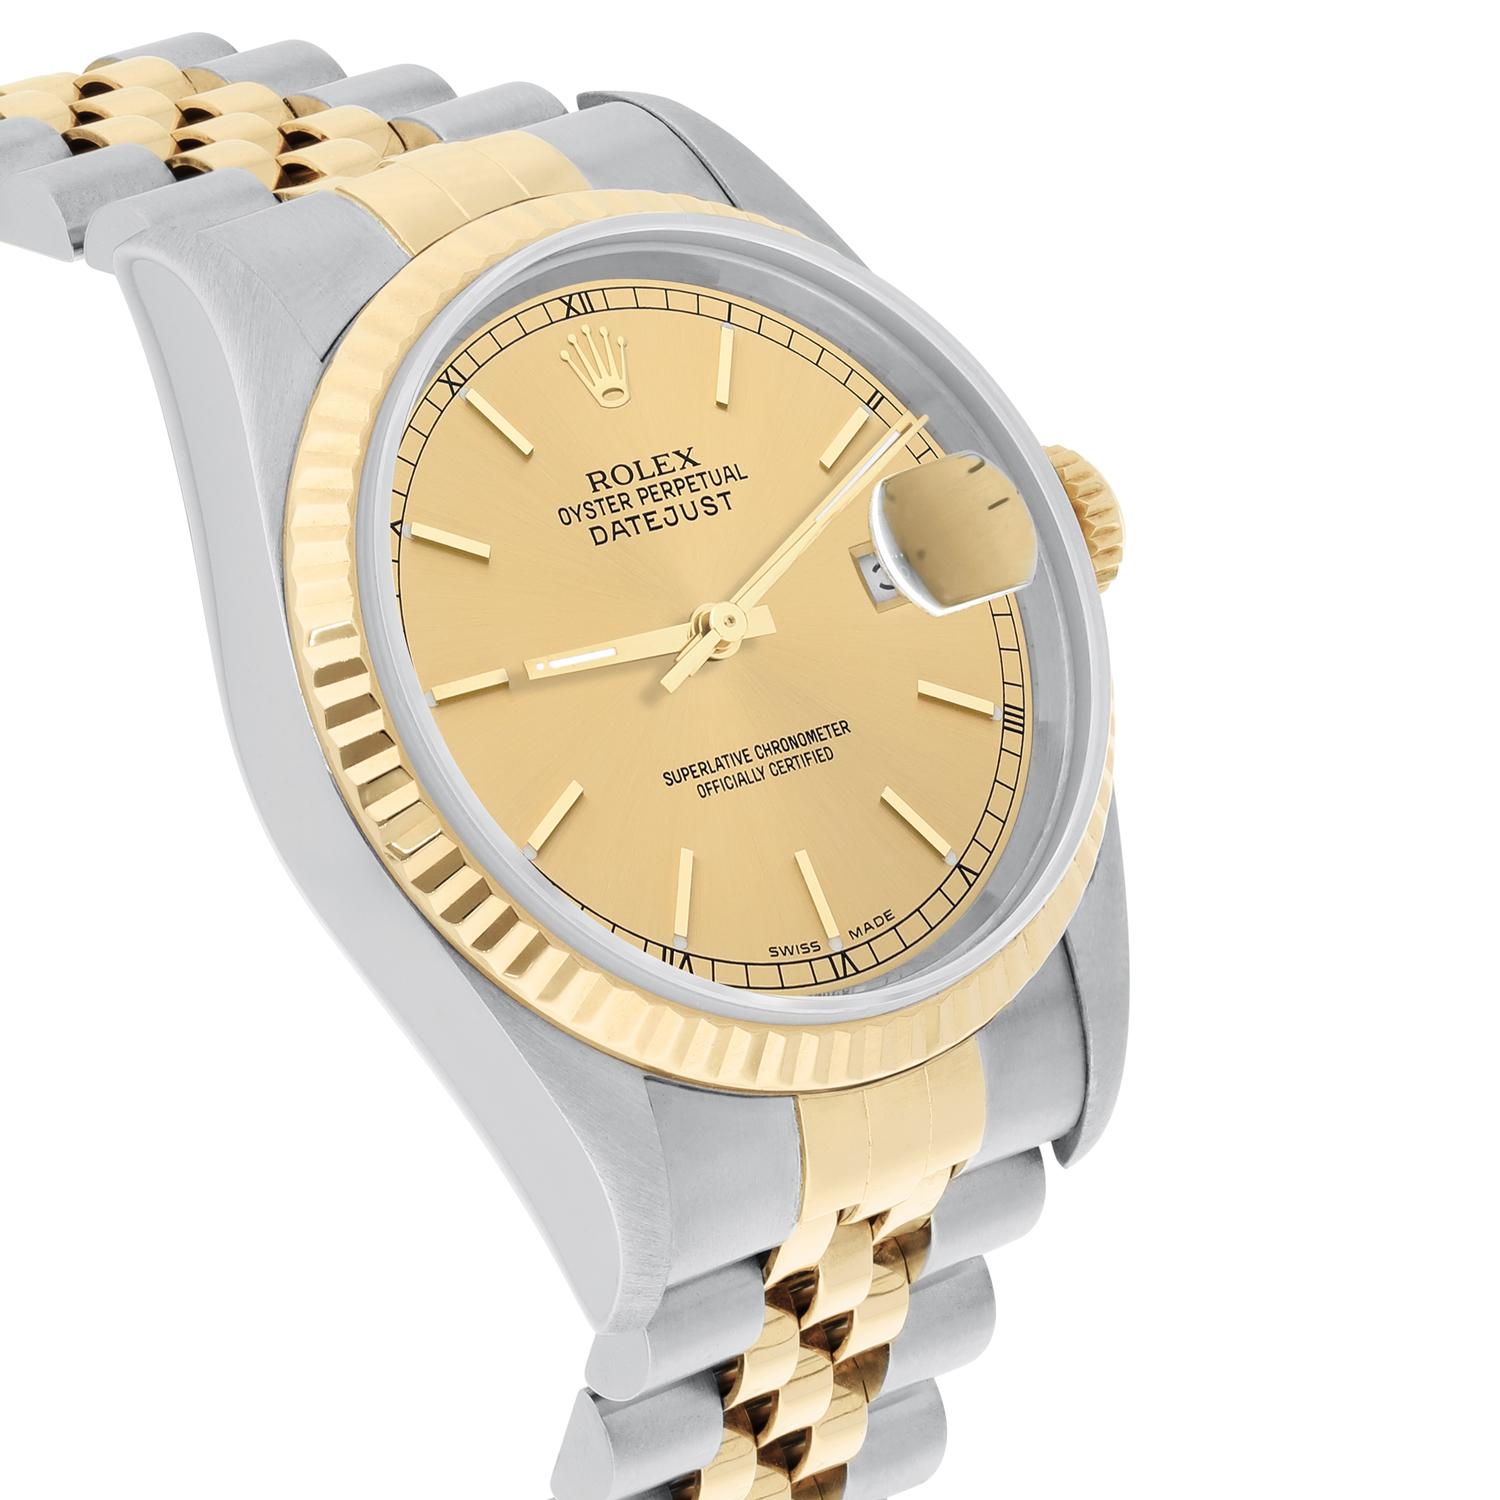 Rolex Datejust 36mm Two Tone Champagne Dial Jubilee 16233 Circa 1995 For Sale 2